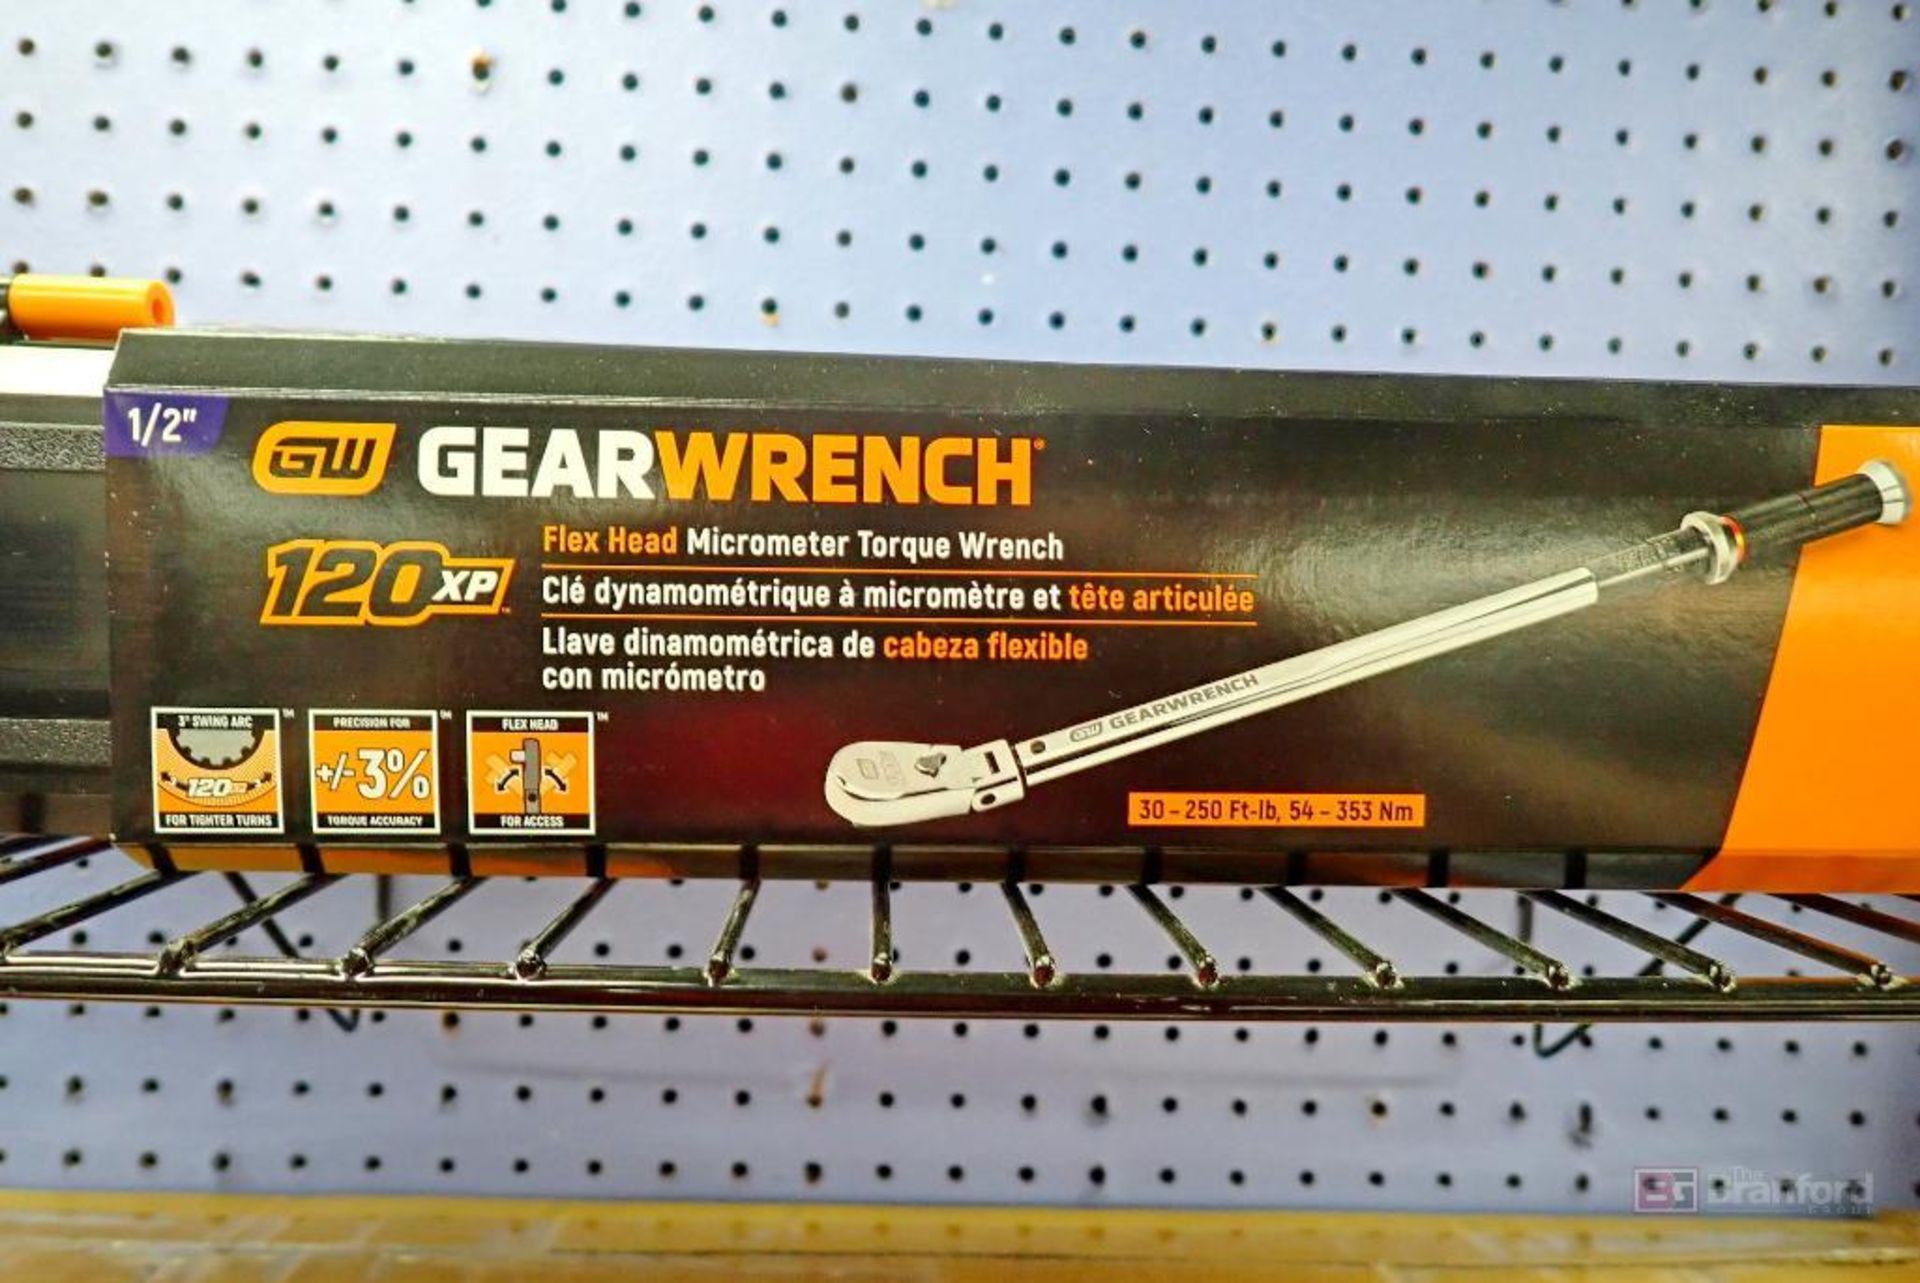 GearWrench 120XP 85189 Flex Head Micrometer Torque Wrench - Image 2 of 5